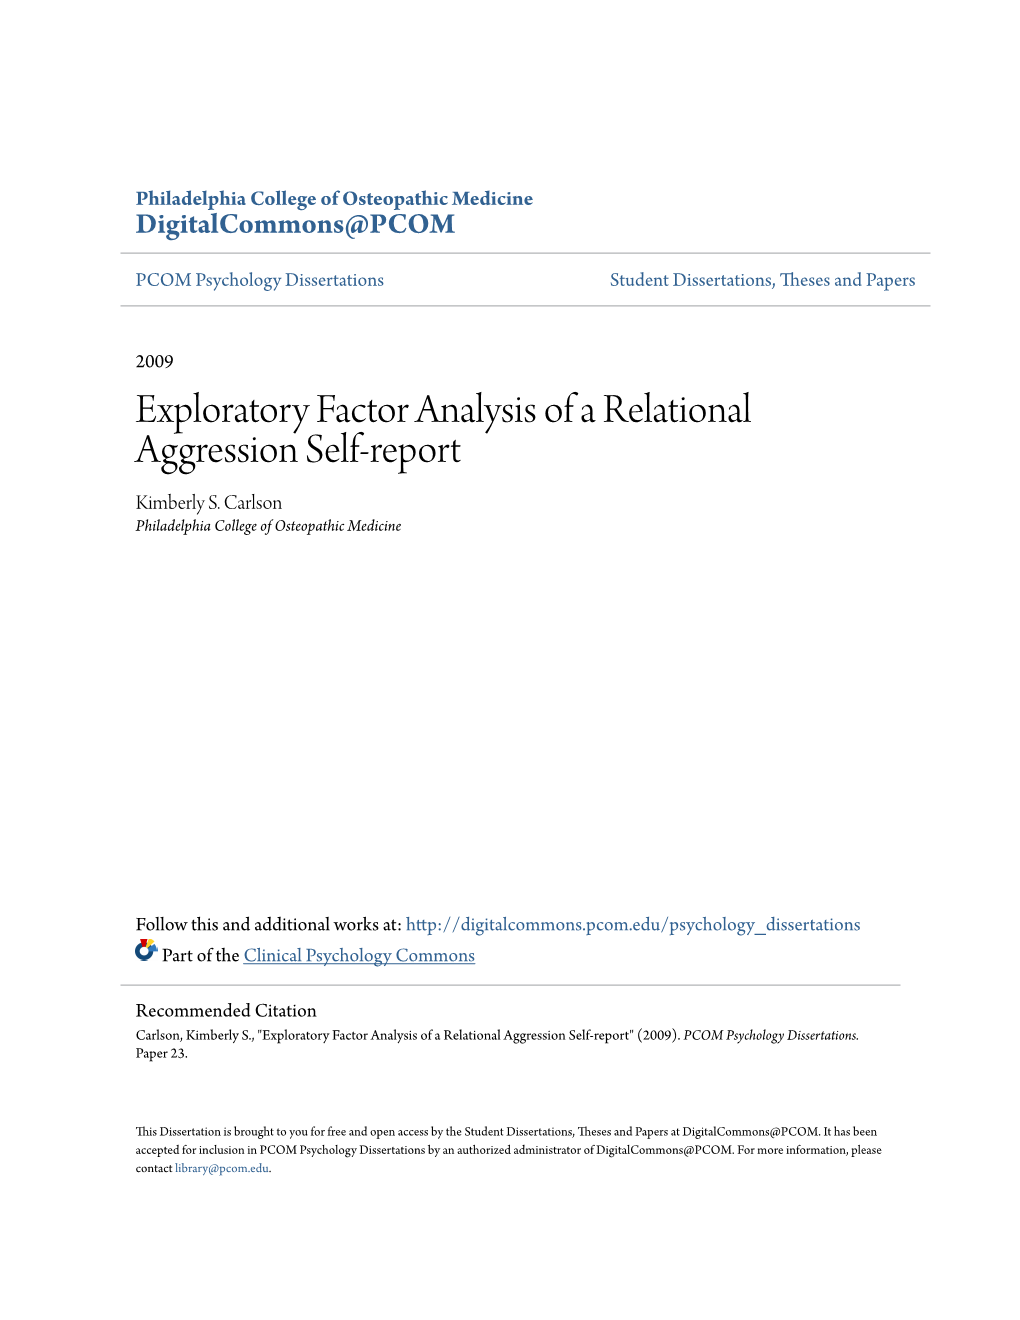 Exploratory Factor Analysis of a Relational Aggression Self-Report Kimberly S